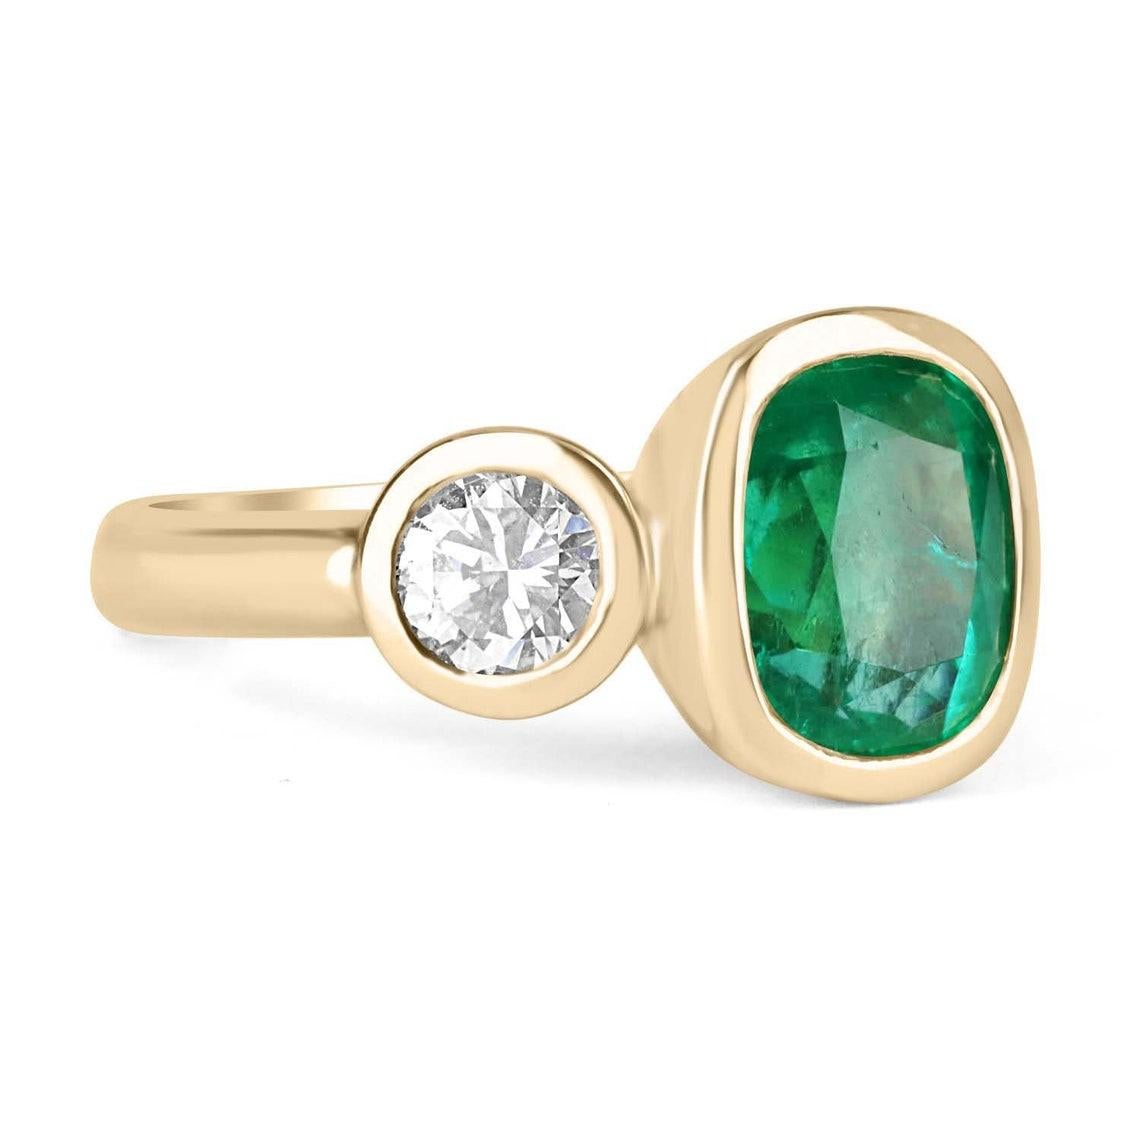 A classic Colombian emerald and diamond three-stone ring. Dexterously crafted in gleaming 18K gold this ring features a natural Colombian emerald-cushion cut from the famous Muzo mines. Set in a secure bezel setting, this extraordinary emerald has a